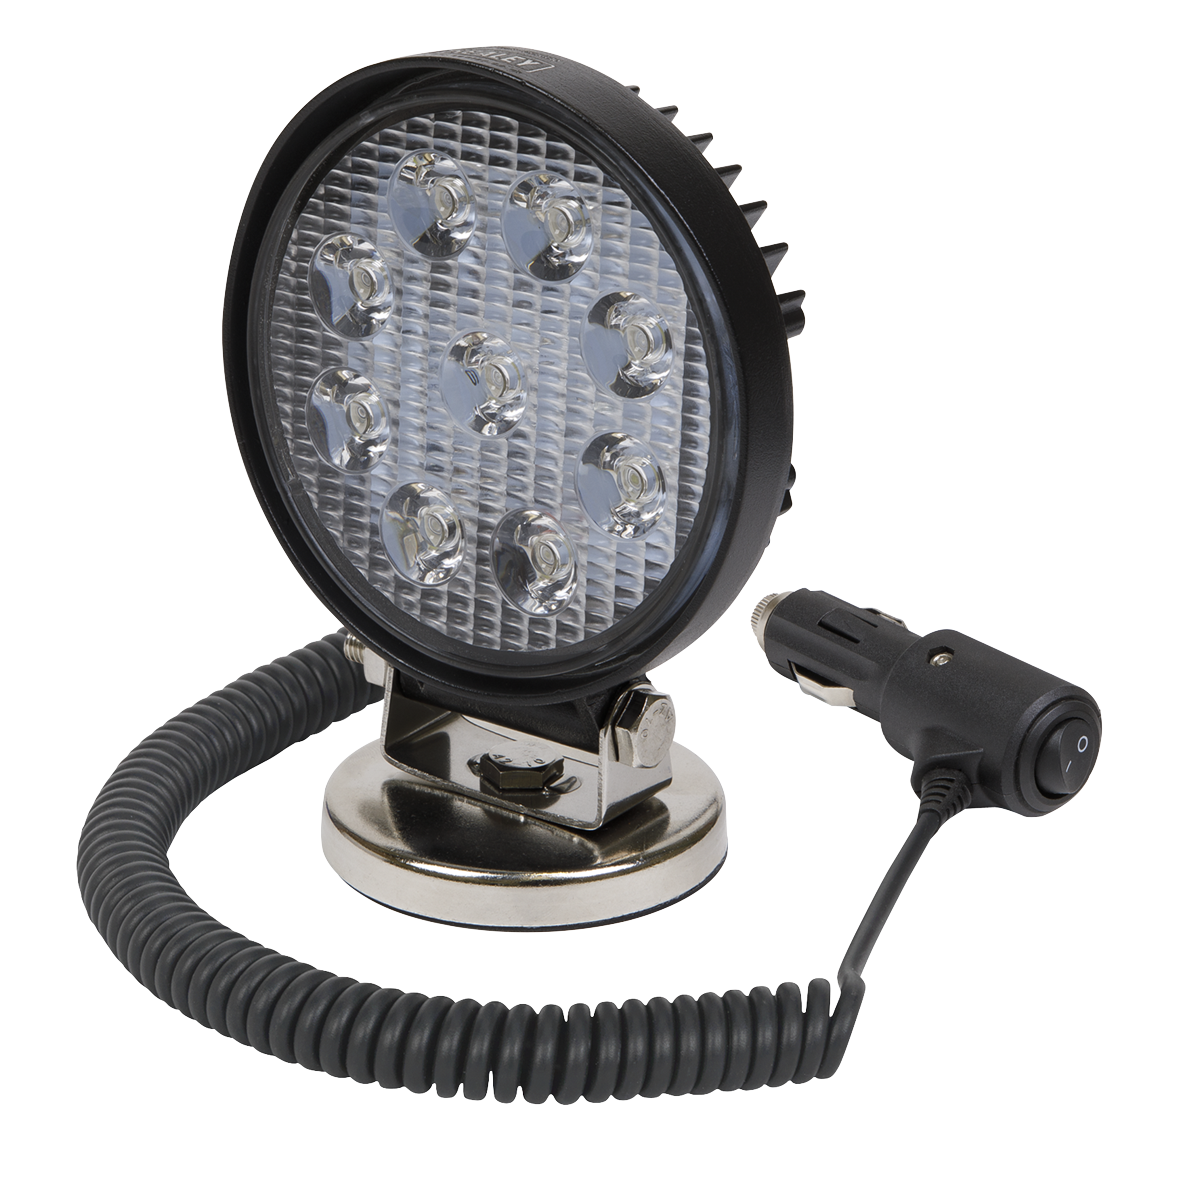 Round Worklight with Magnetic Base 27W SMD LED - LED3RM - Farming Parts